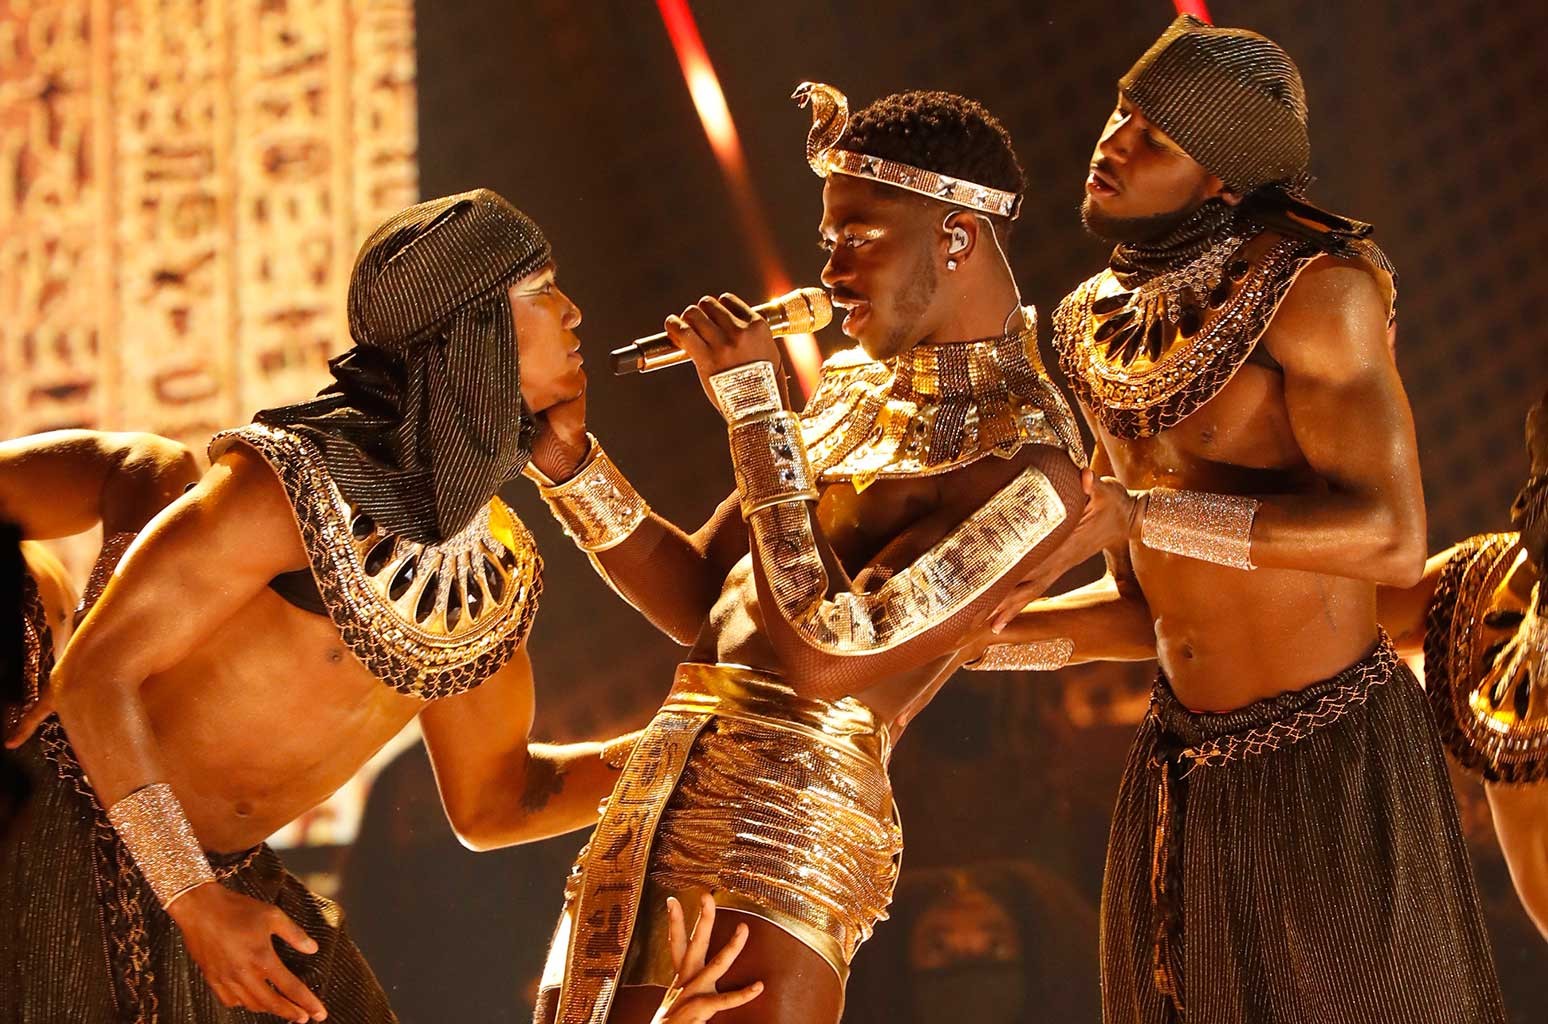 Watch All The Performances From The 2021 BET Awards Conversations